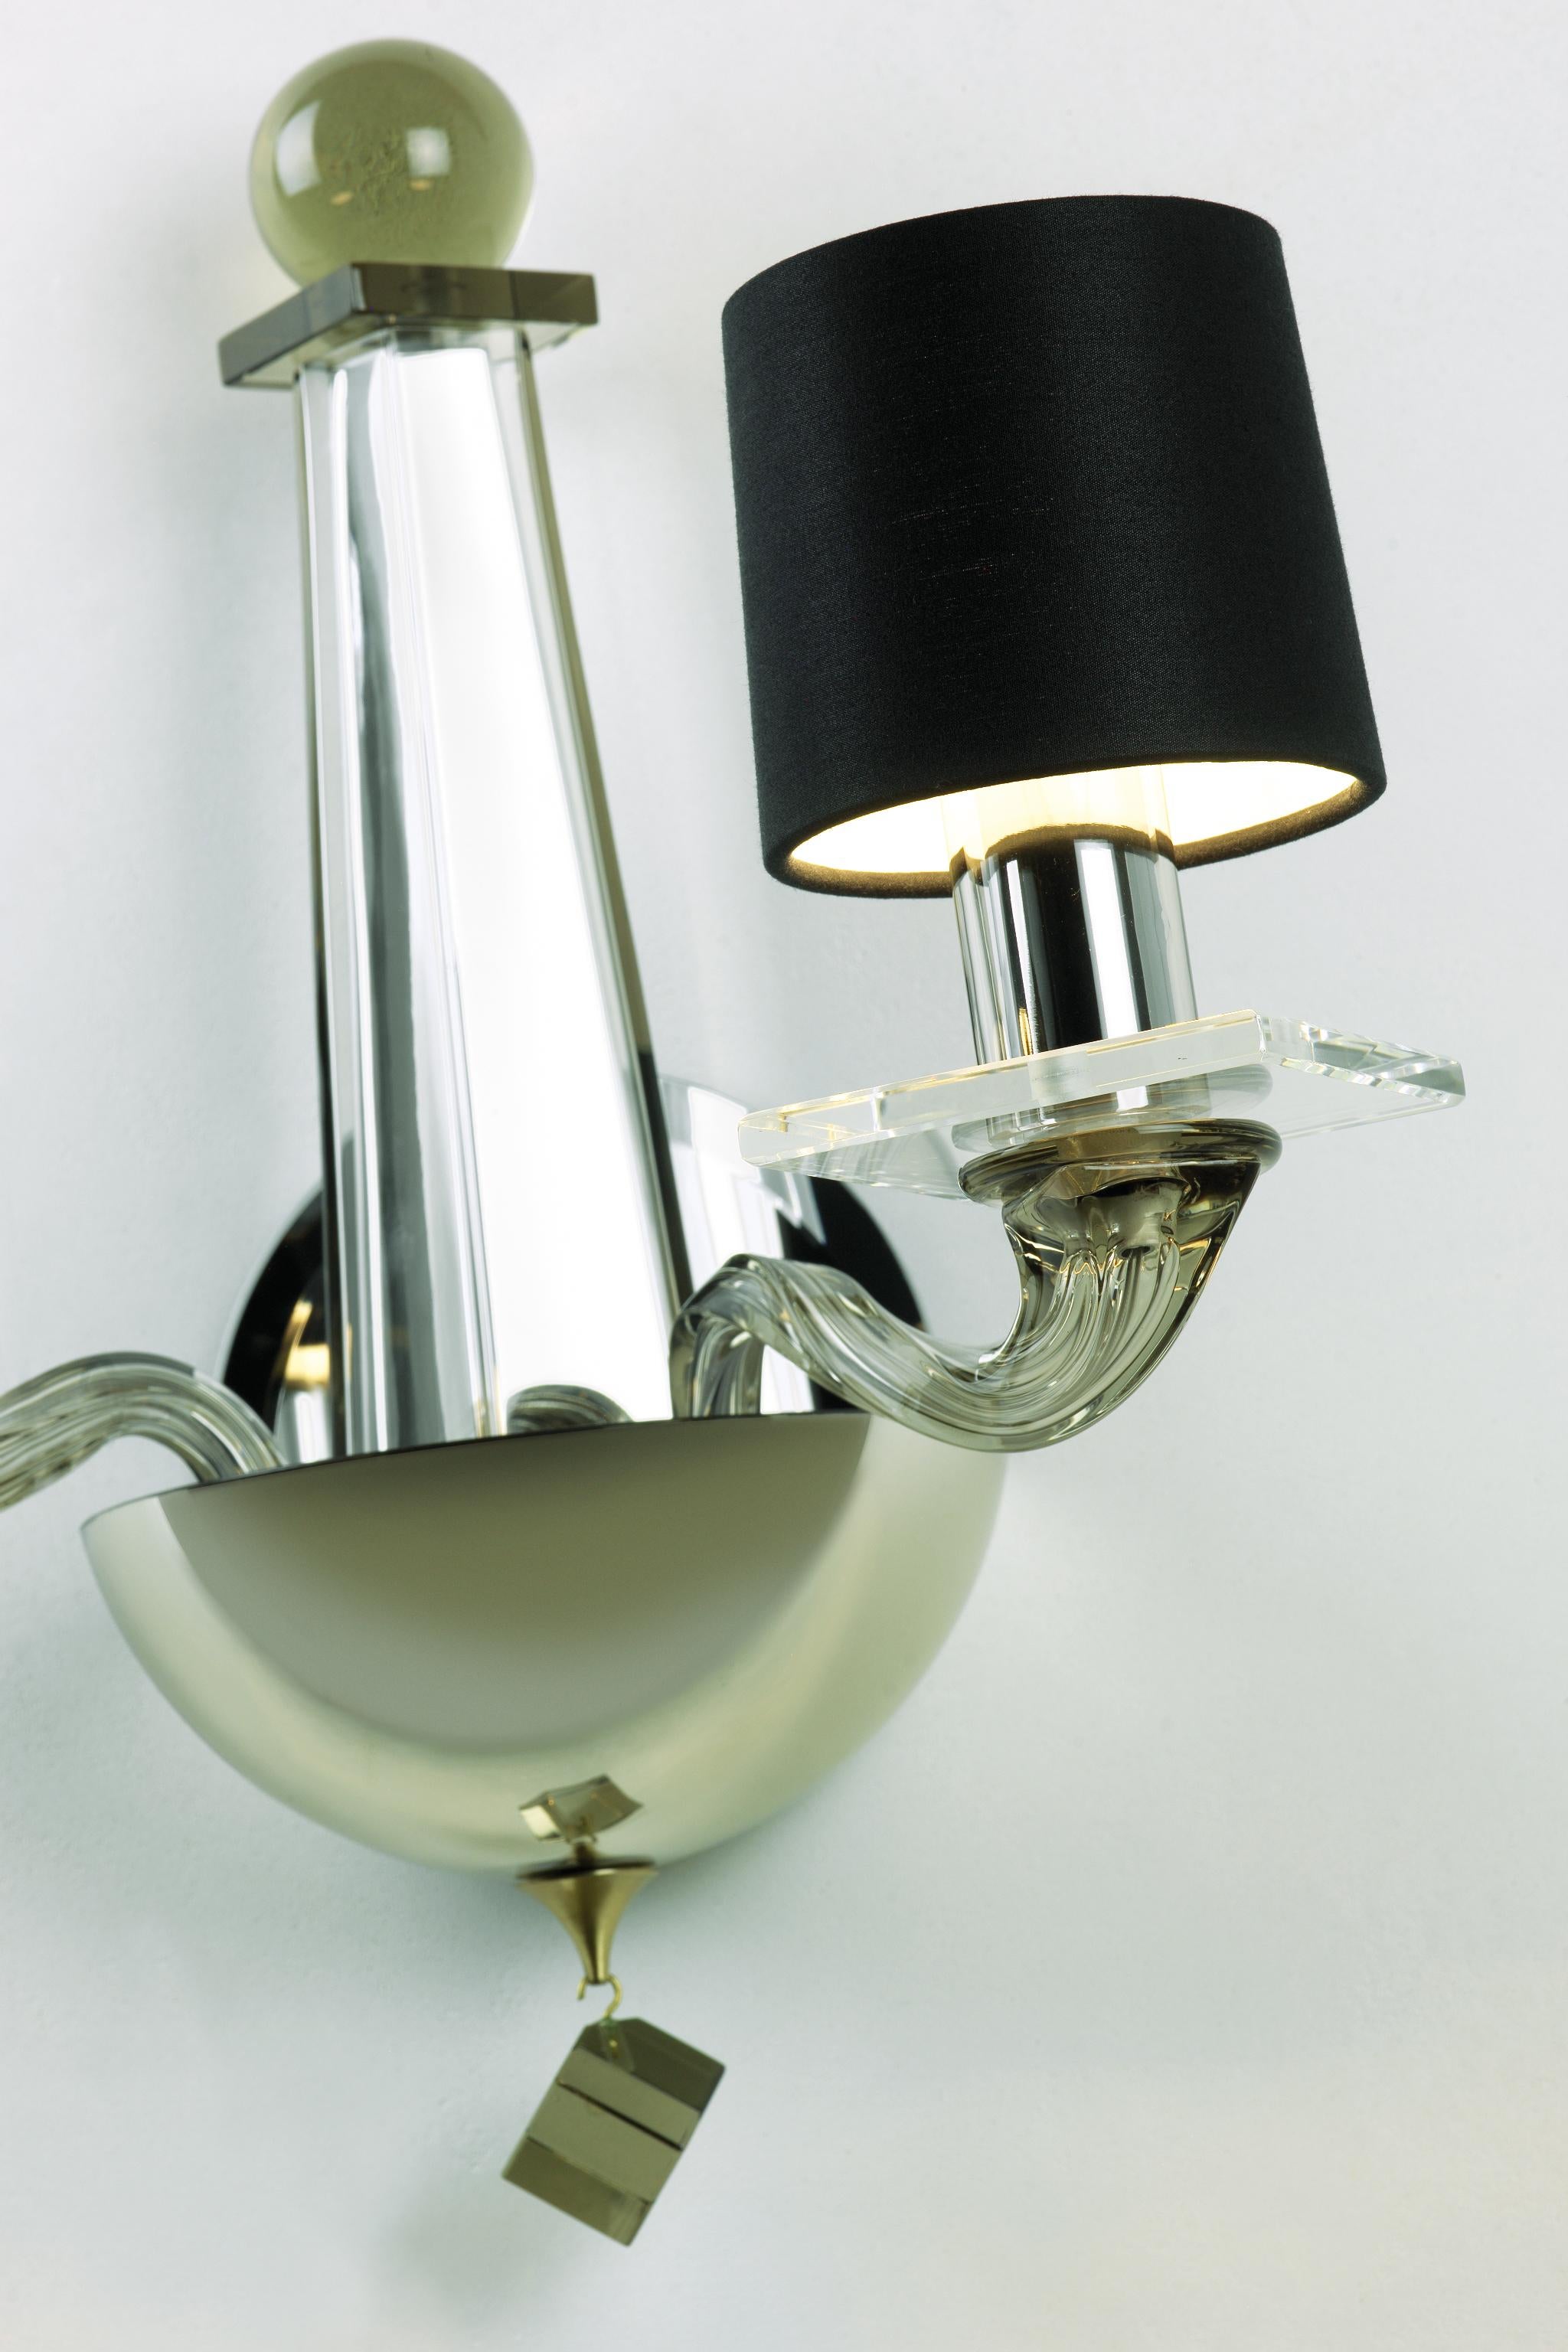 A stunning handblown Venetian glass sconce with two arms and infinite charm. The two-arm wall sconce in handblown Murano glass. Grey glass, hand-silvered glass, and brass hardware.

- Backplate Dimensions: 5.5